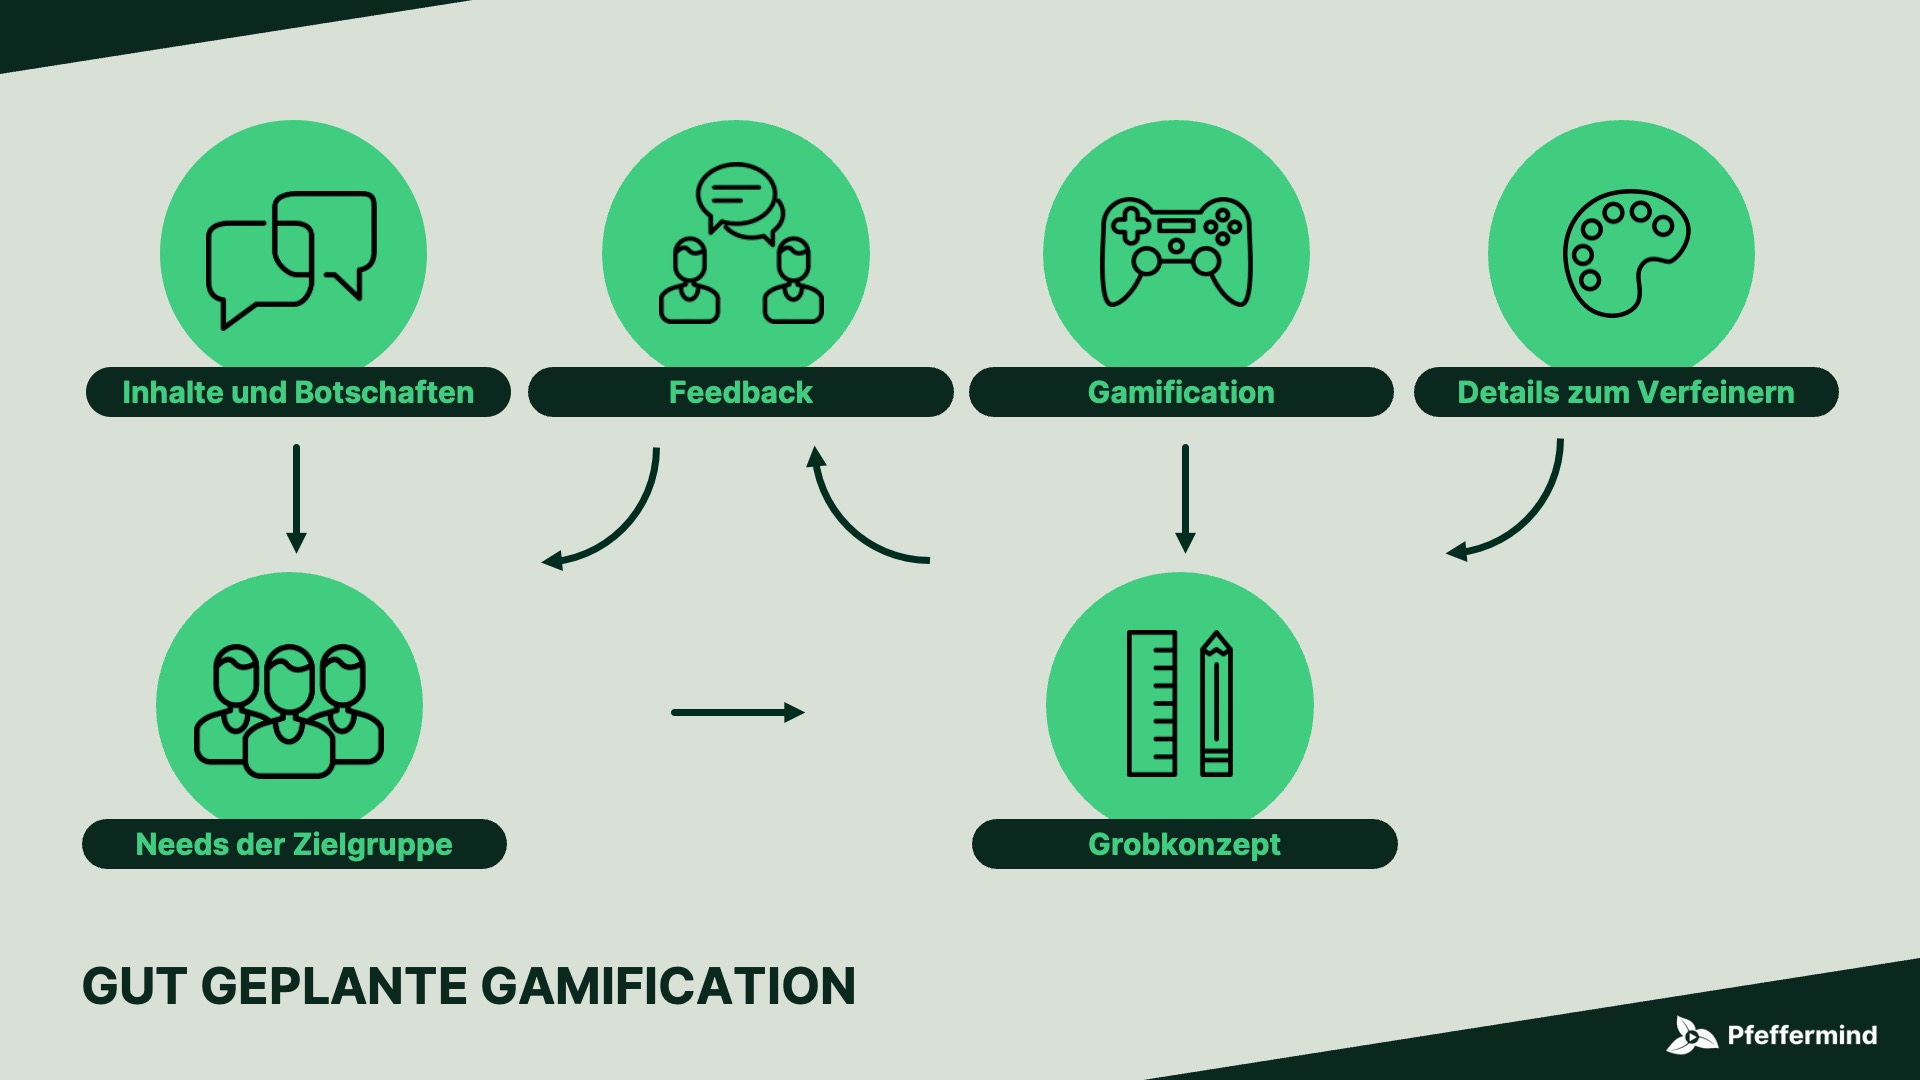 Gut geplante Gamification